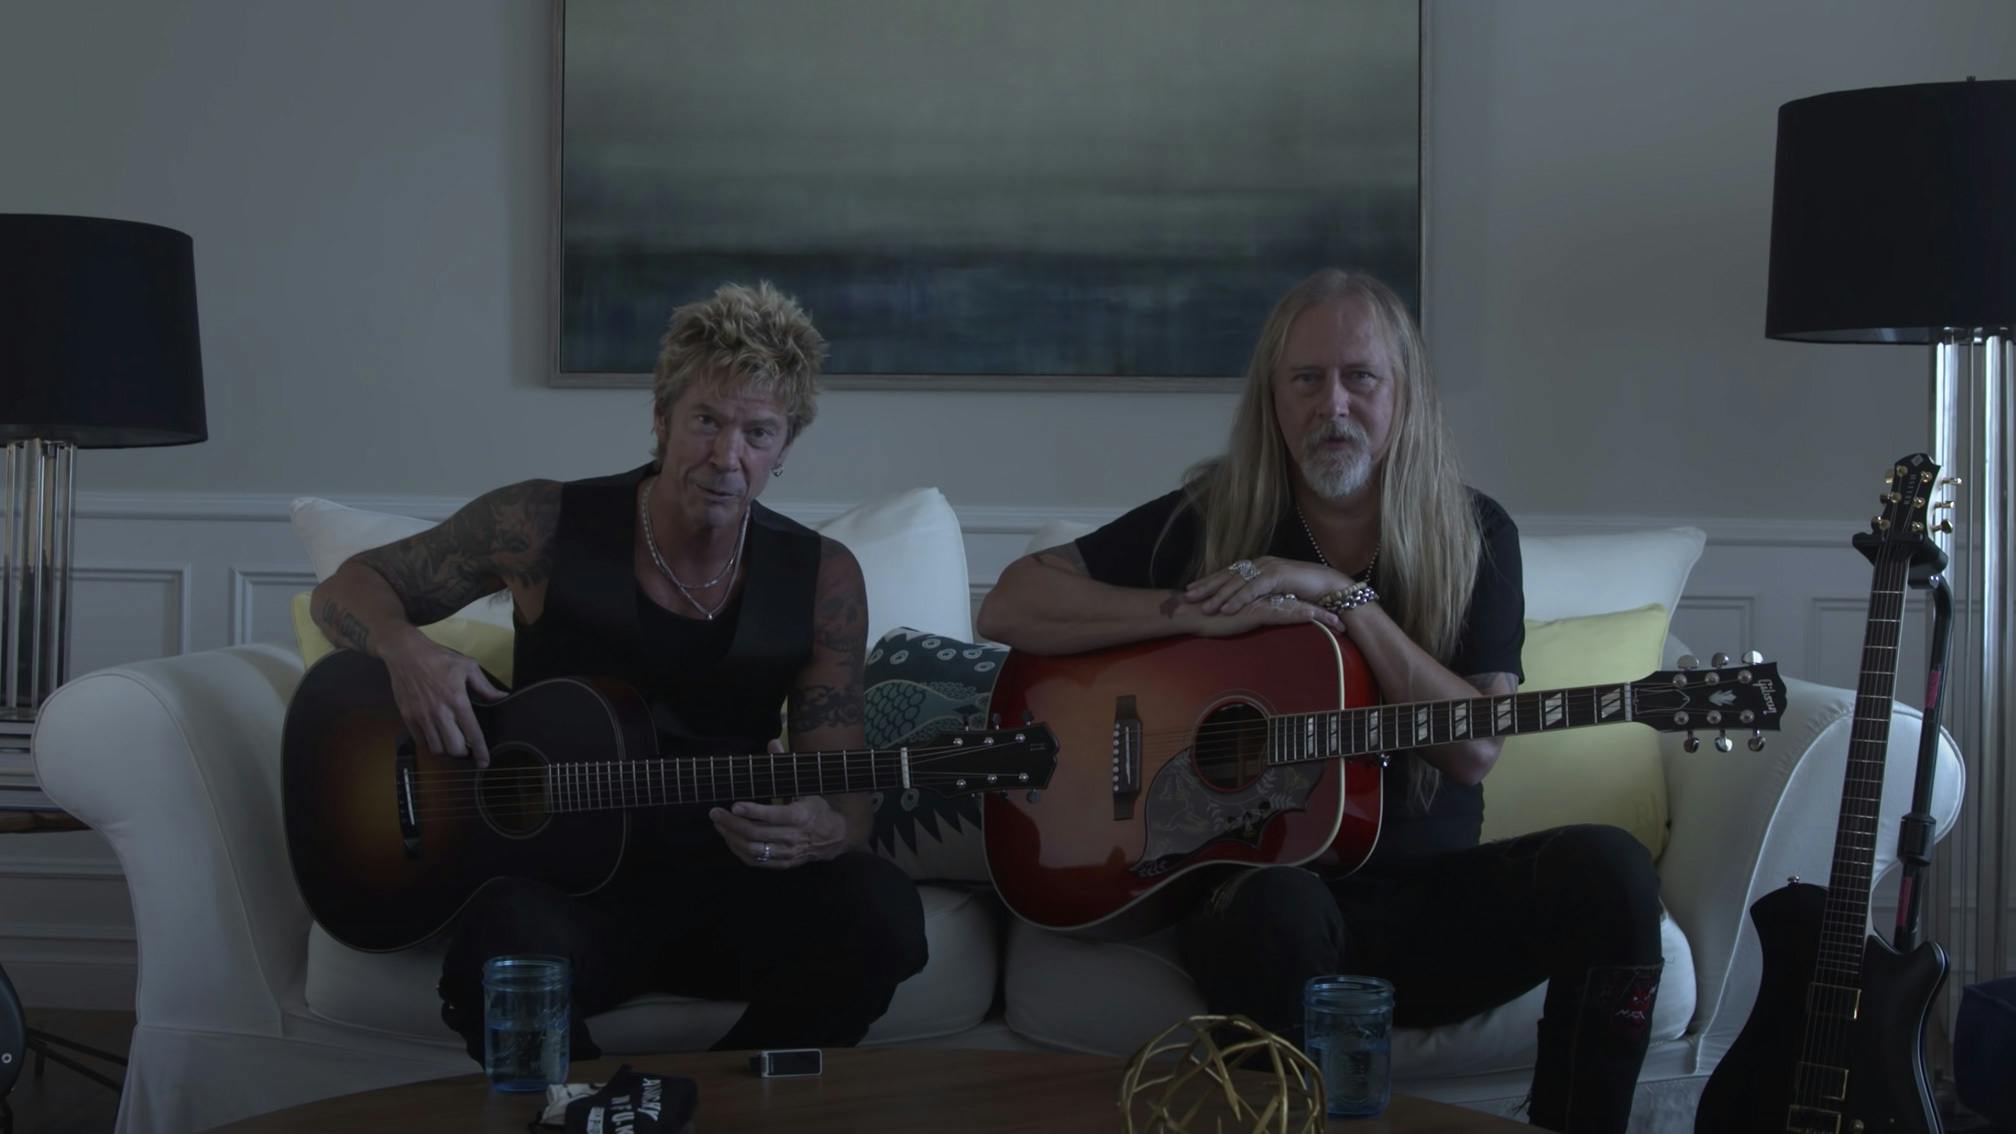 Watch Guns N’ Roses’ Duff McKagan And Alice In Chains’ Jerry Cantrell Cover A Satisfied Mind